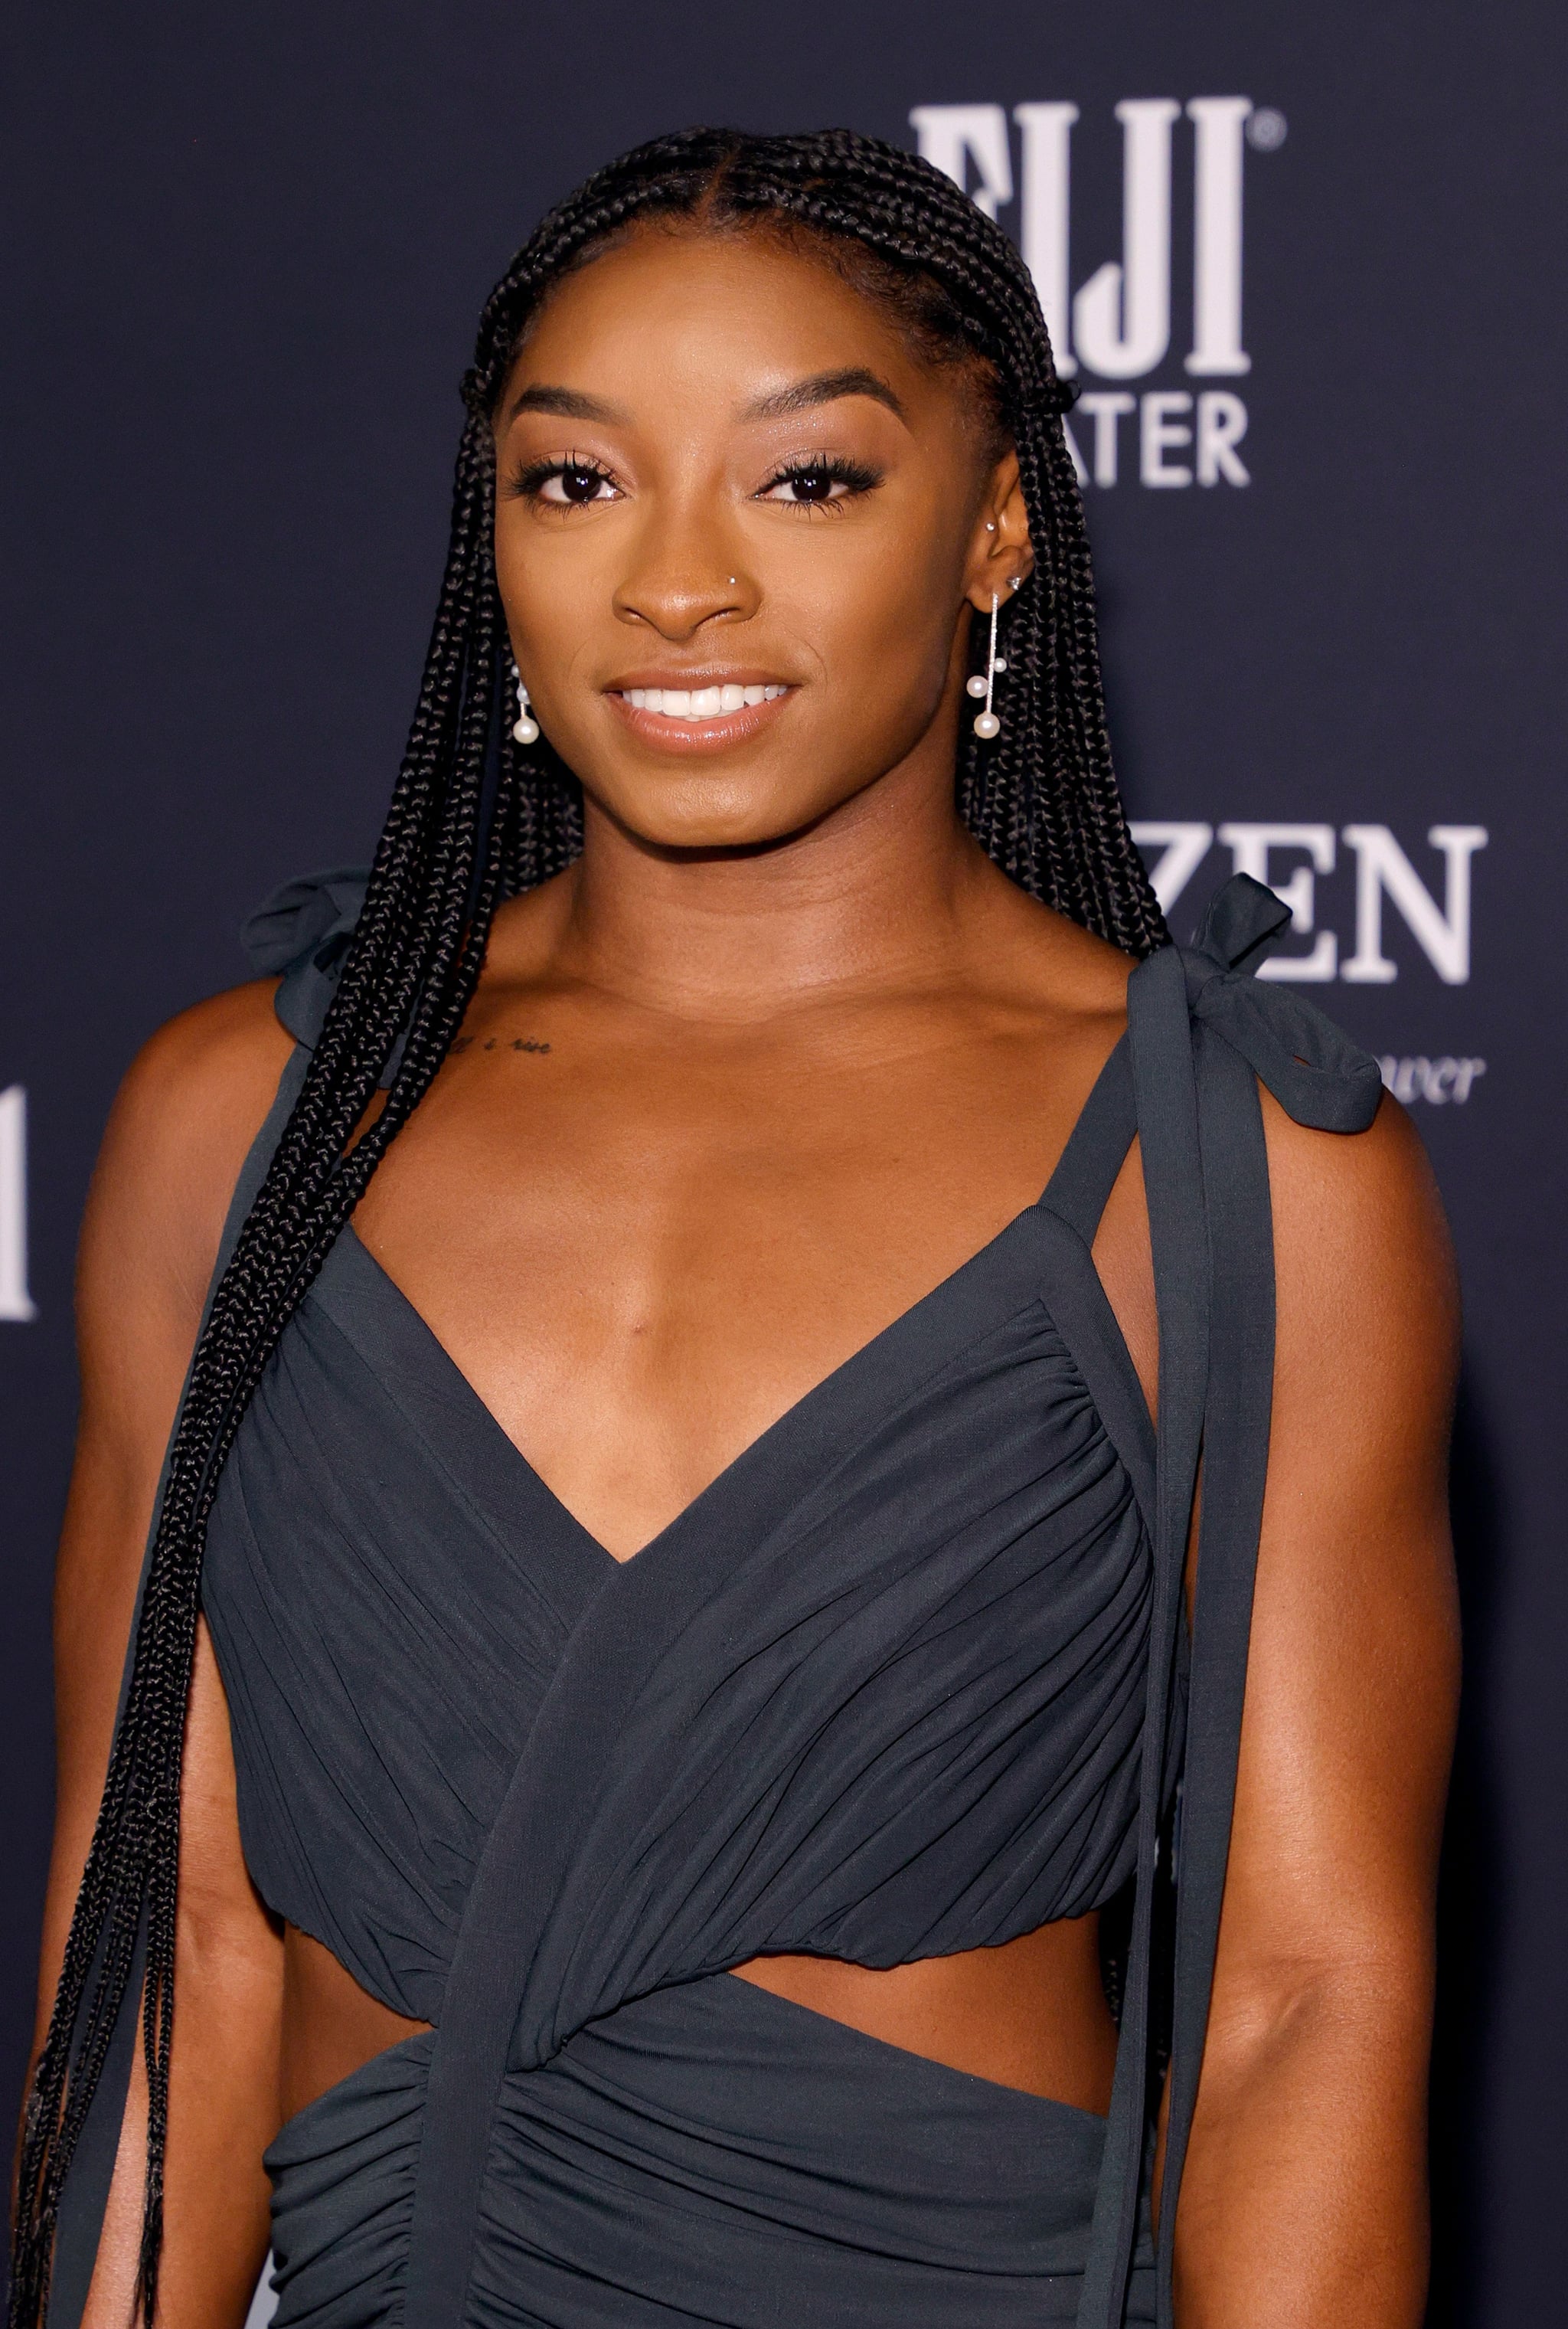 LOS ANGELES, CALIFORNIA - NOVEMBER 15: Simone Biles attends the 6th Annual InStyle Awards on November 15, 2021 in Los Angeles, California. (Photo by Amy Sussman/WireImage)